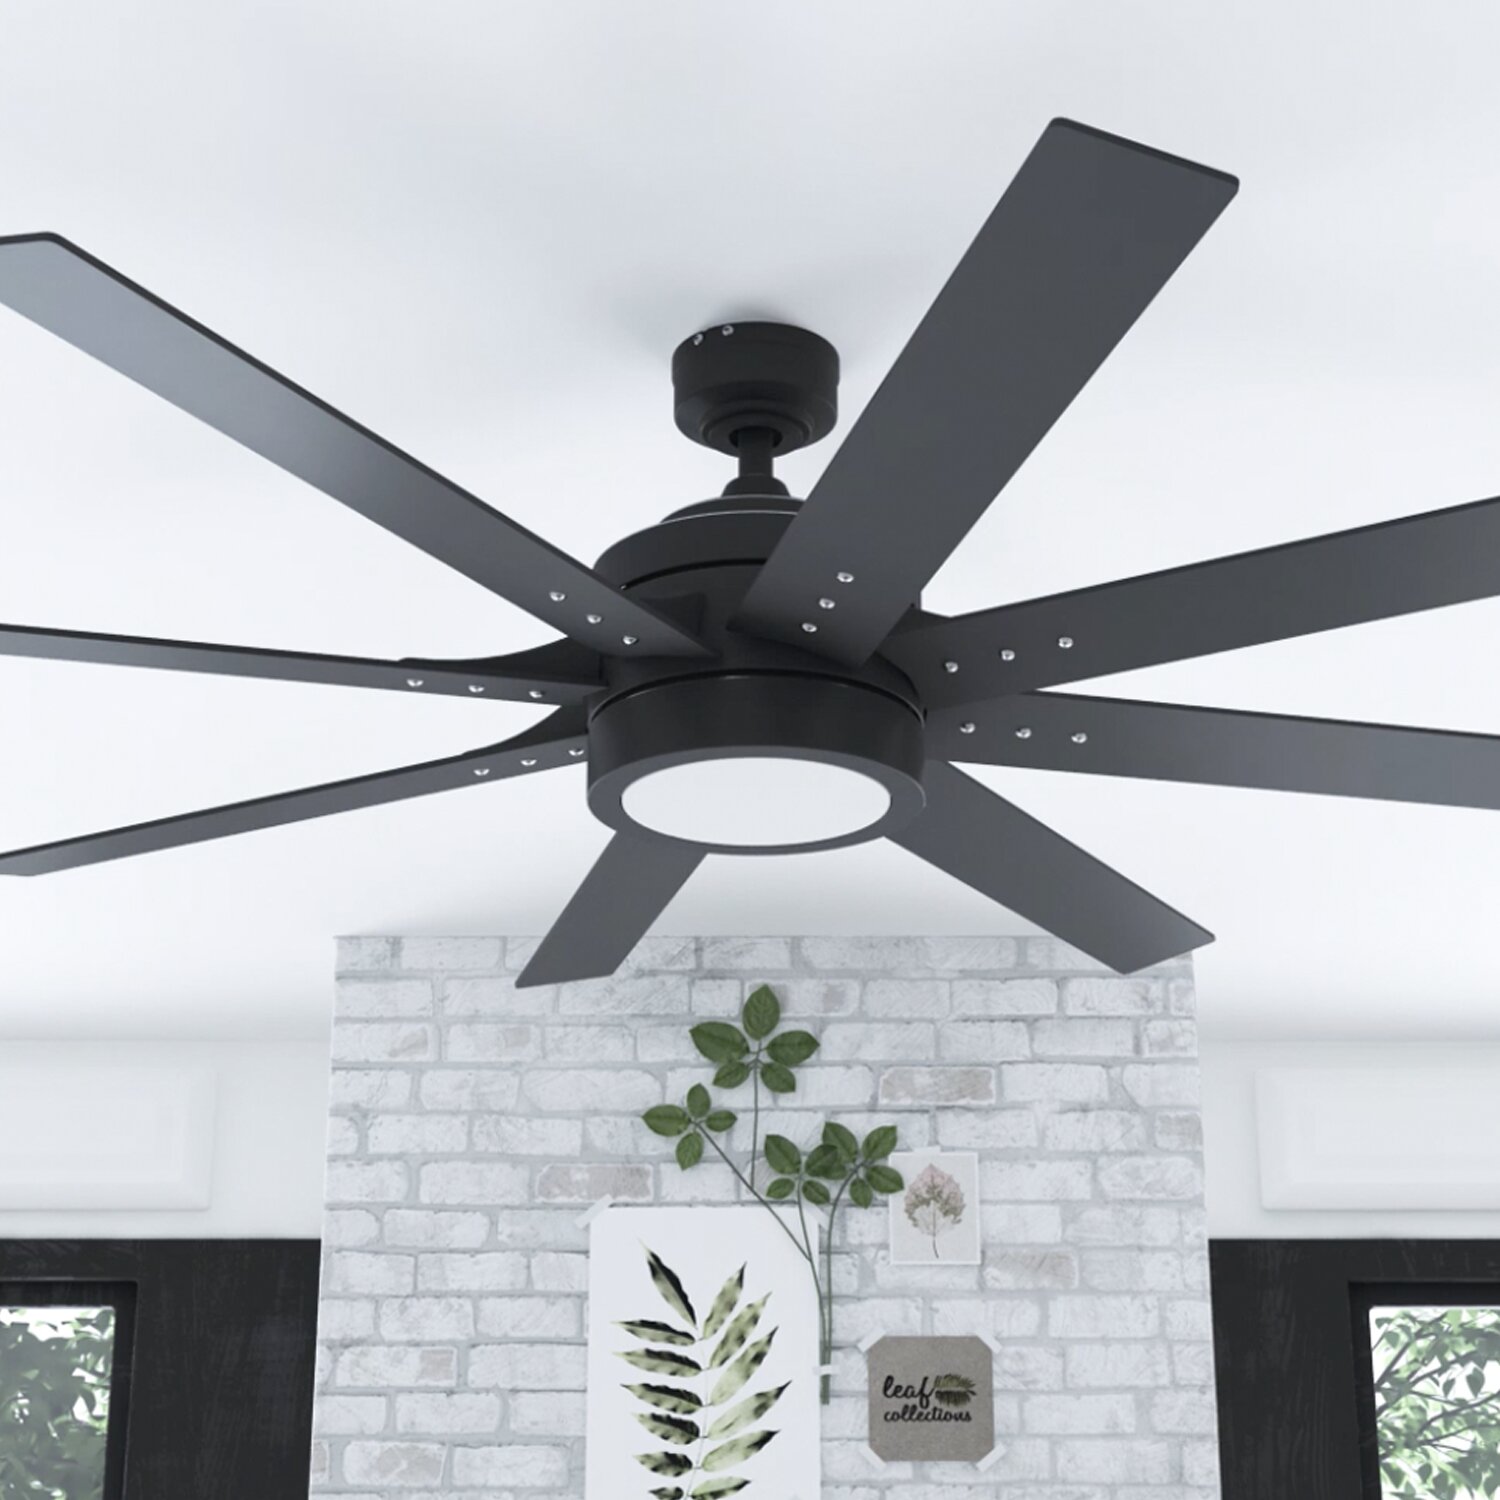 Honeywell 62 Xerxes 8 Blade Led Windmill Ceiling Fan With Remote Control And Light Kit Included Reviews Wayfair